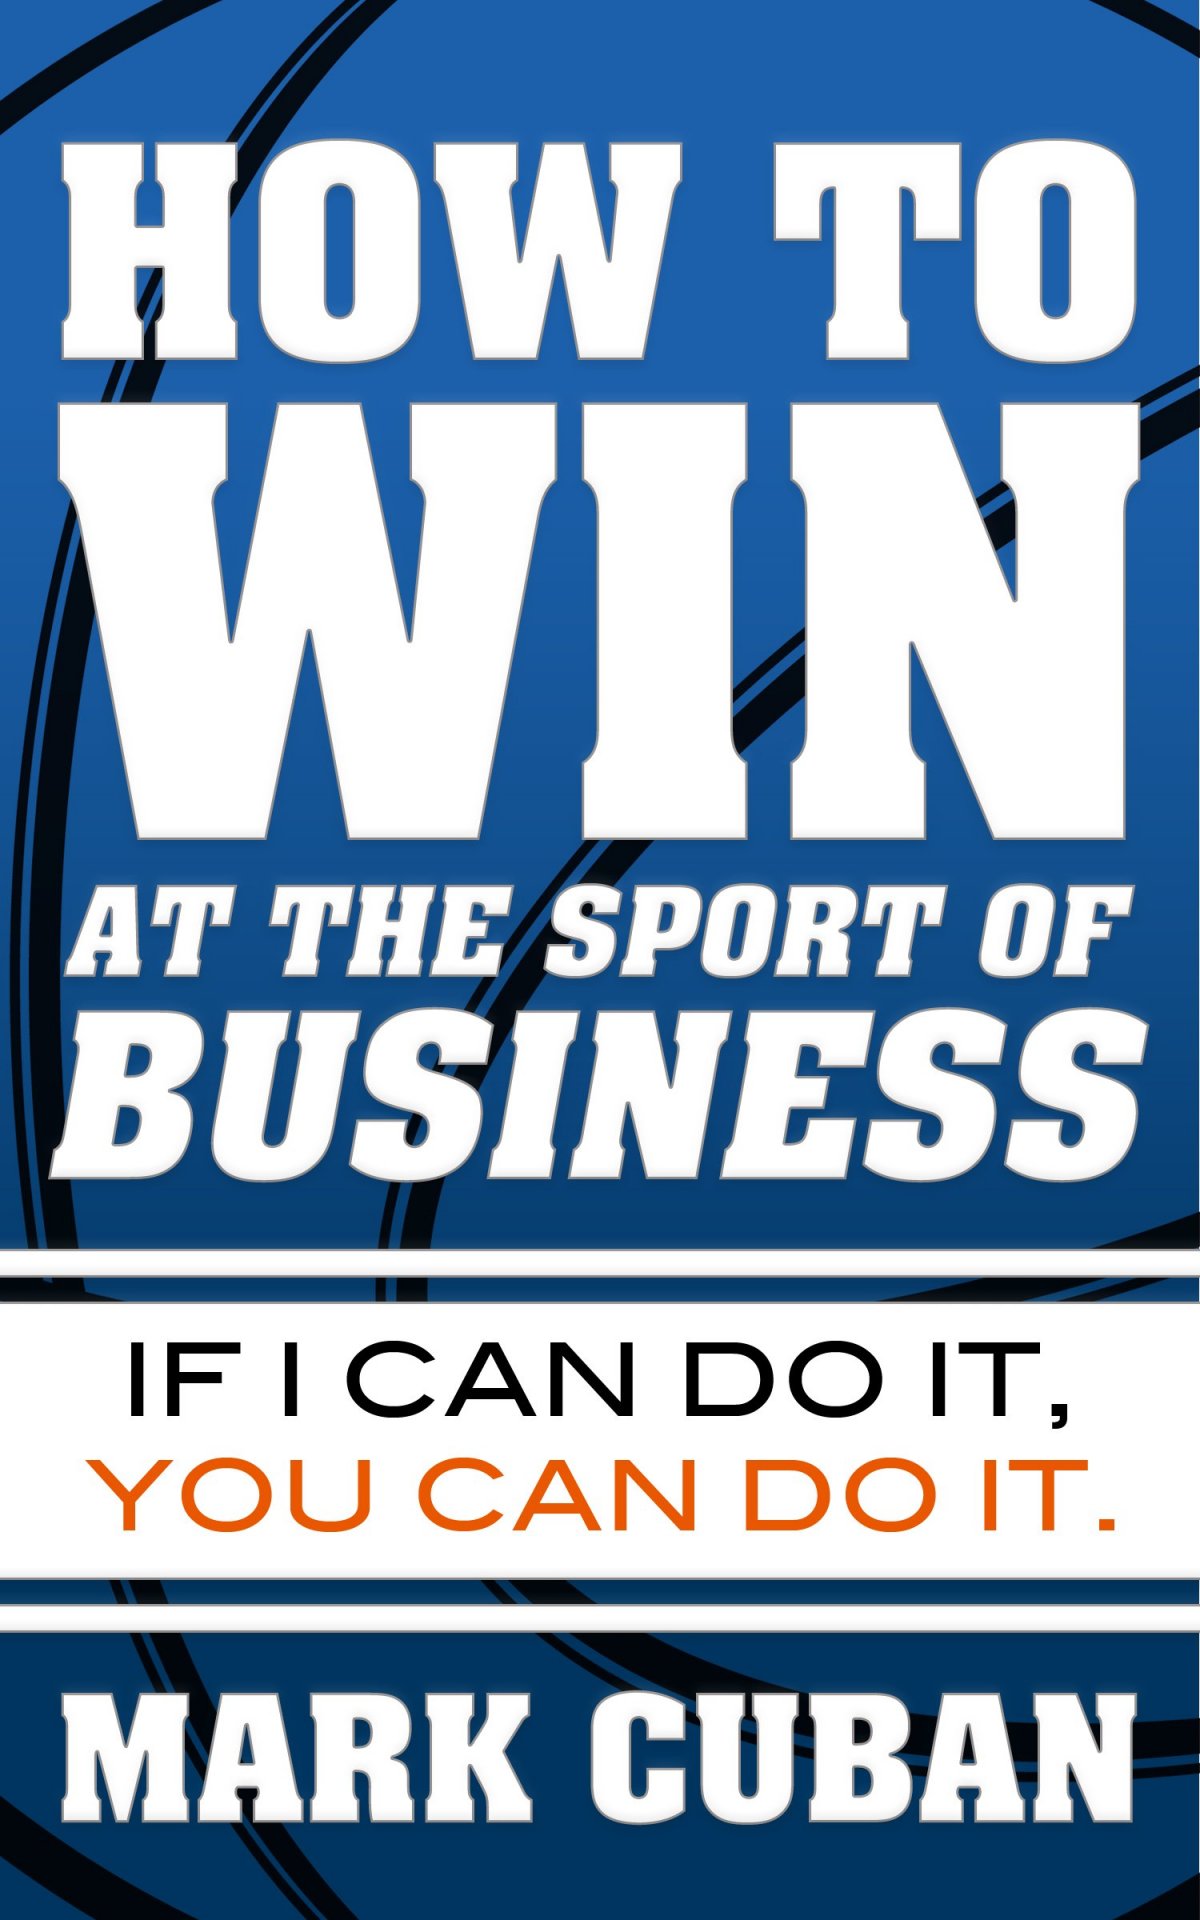 how-to-win-at-the-sport-of-business-by-mark-cuban